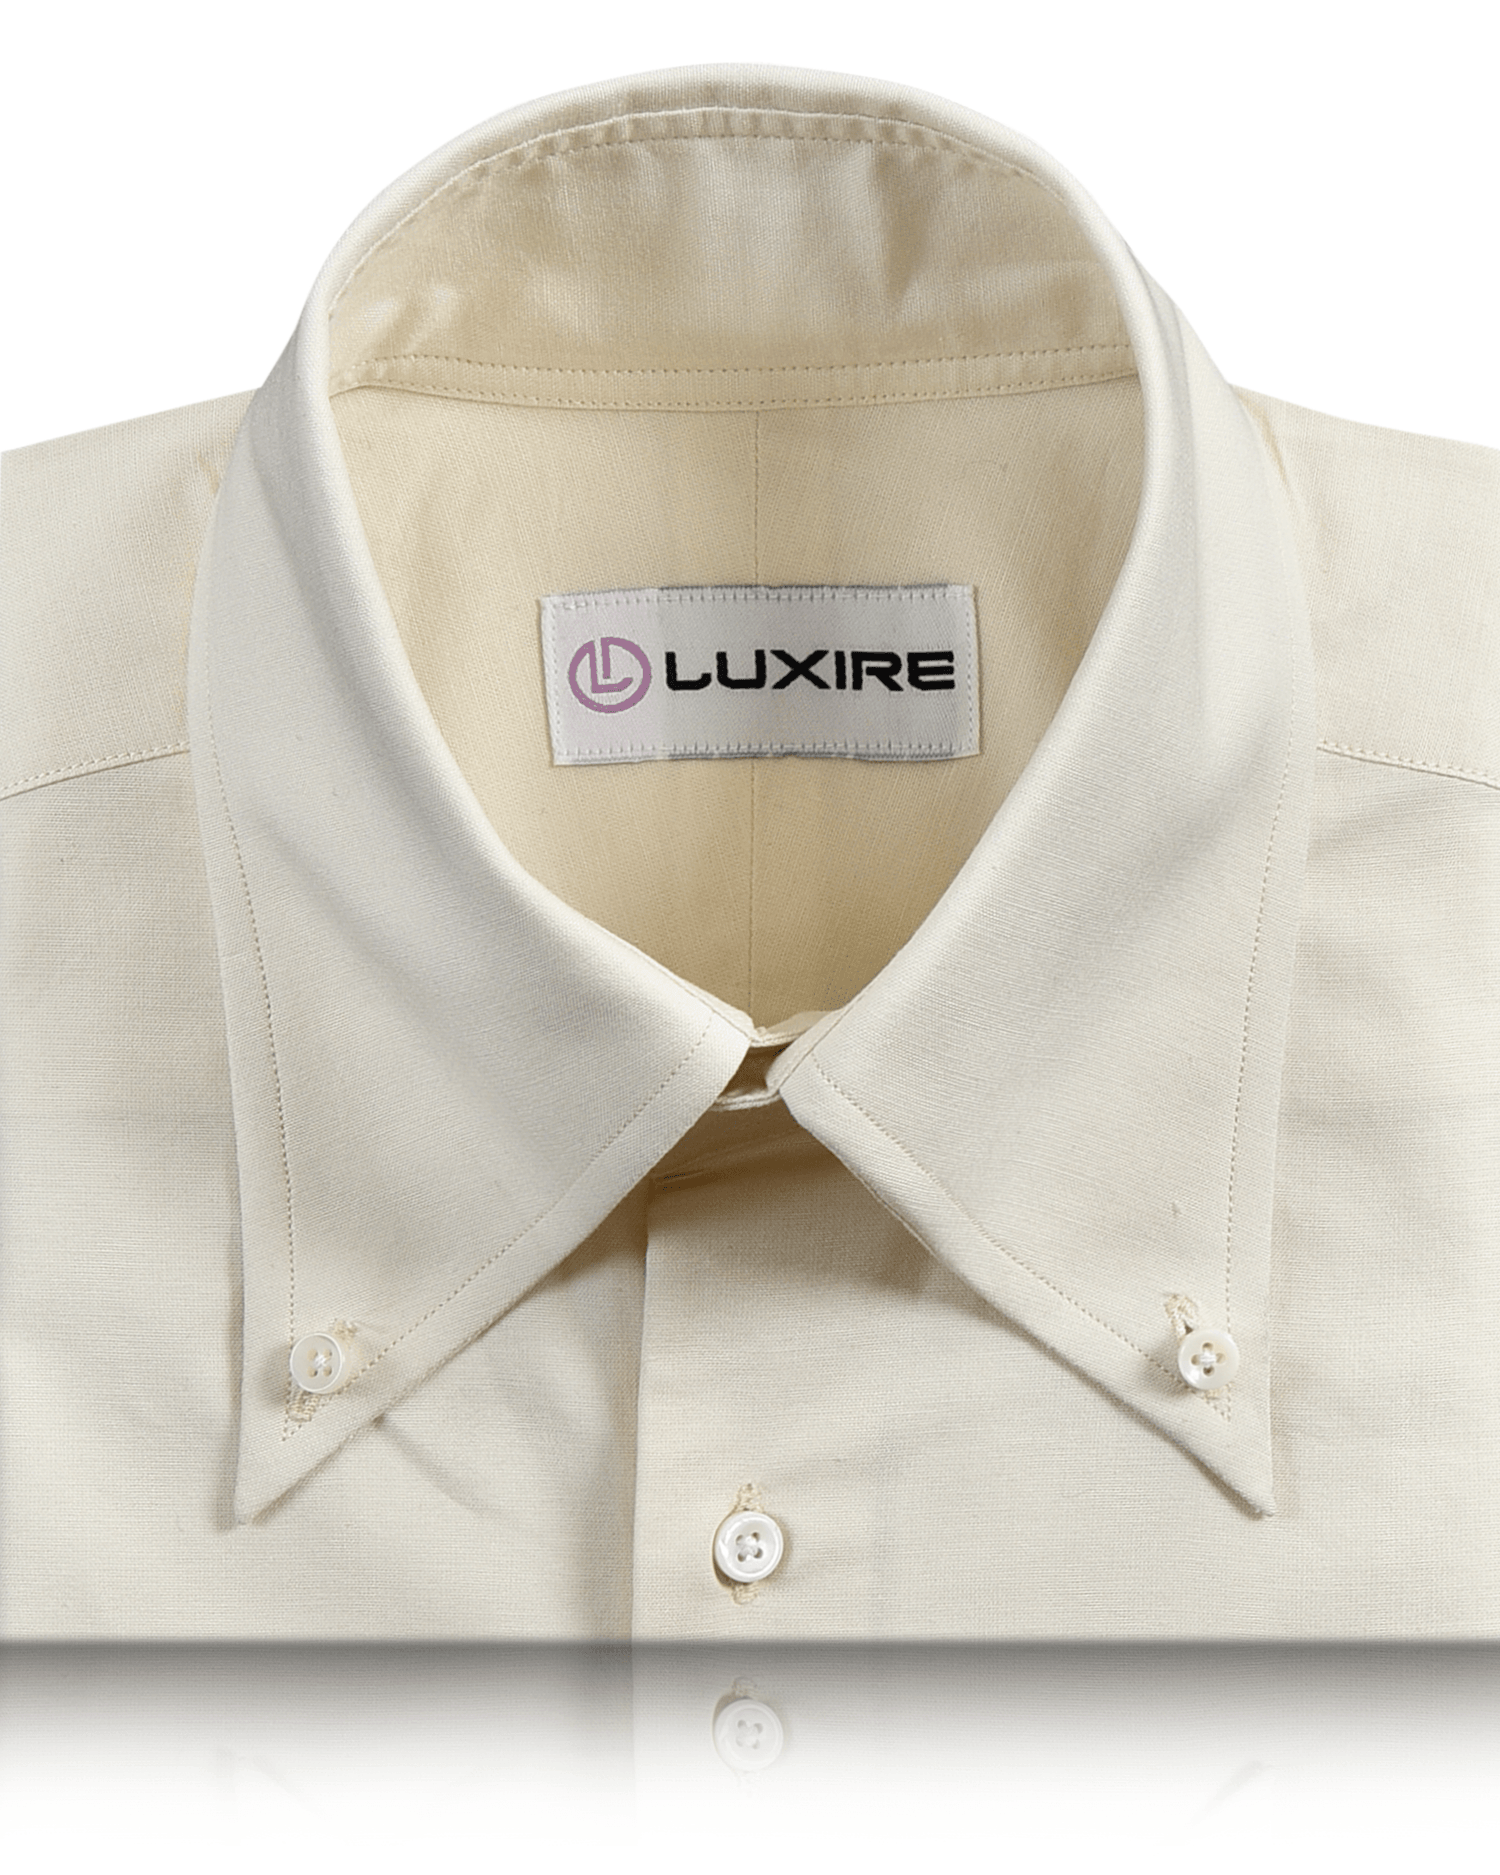 Collar of the custom oxford shirt for men by Luxire in cream ecru